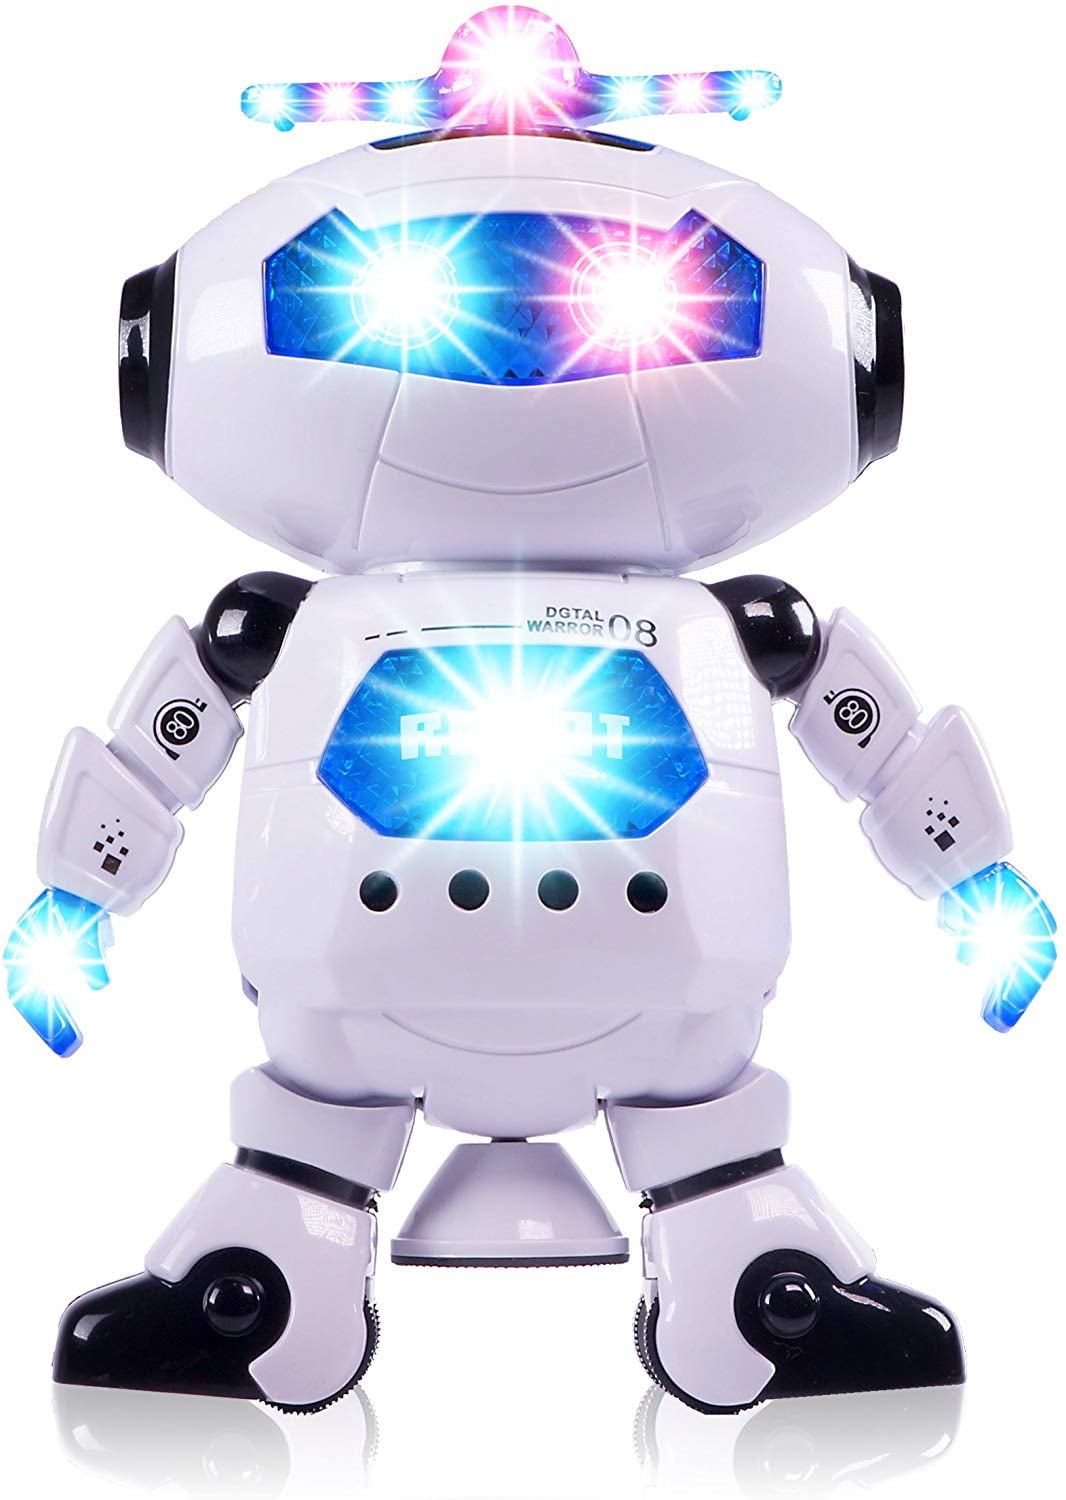 Details about   Dancing Robot Smart Toy For Boys Toddler Musical Light Toys Birthday Xmas Gift 